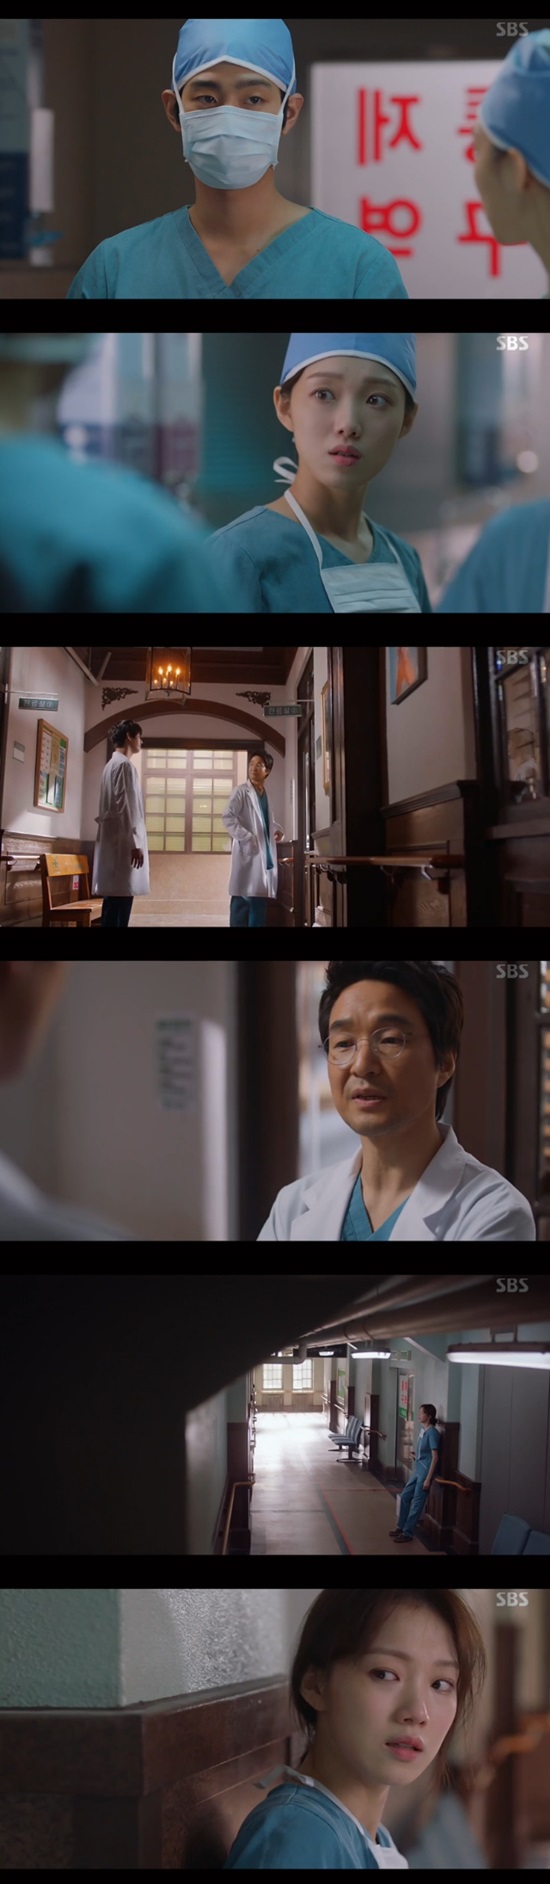 Lee Sung-kyung was in a crisis of unfavorability due to his selfish move to Misunderstood the fatal weakness of surgical depression.In the third episode of SBSs Romantic Doctor Kim Sabu 2 broadcast on January 13 (playplay by Kang Eun-kyung/directed by Yoo In-sik, Lee Sung-kyung) made a selfish move by Missunderstood Seo Woo Jin (played by Ahn Hyo-seop).Physician Cha Eun-jae was dispatched from the main hospital of Geo University Hospital to the Bunwon Doldam Hospital because of the surgery of vomiting during surgery and falling asleep, but he was rushed to hide the operation depression and ran out of the operating room of Kim Sabu (Han Seok-gyu) without holding for 10 minutes.Kim, who already knew about the operation of Cha Eun-jae, said, Do not come into my operating room again.Park Min-guk (Kim Joo-heon) and medical staff came to Doldam Hospital to intercept the surgery of the Korean Military Minister, and Park Min-guk decided to carry out the second surgery of the Korean Military Minister.Park Min-guk needed a Physician who participated in the first surgery and asked for help from Cha Eun-jae, and Cha Eun-jae proposed an alliance to Seo Woo Jin.To go to the surgery of Park Min-guk together with the condition to send it to the main office.In fact, Cha Eun-jae, who ran out of Kim Sa-bus operating room in 10 minutes, did not help Park Min-guk much, so he asked Seo Woo Jin for help. When Seo Woo Jin refused, Cha Eun-jae tried to go into Park Min-guks surgery alone, but Park Min-guk later refused.When Seo Woo Jin decided to go into surgery for Park Min-guk, Cha Eun-jae was angry that Seo Woo Jin hit the back of his head.In fact, Seo Woo Jin followed Kims instructions. Kim said, Im not asking your opinion. Do what you say.If you do not, you should go in, but do you want to see him vomit and go down again? Seo Woo Jin went into surgery for Park Min-guk as instructed by Kim Sabu and for Cha Eun-jae.Unlike Kim Sabu, who is the first patient to care for patients, and Seo Woo Jin, who has repeatedly fallen into surgery with a surgical depression, he did not recognize my surgical depression, so he repeatedly suffered from a lot of trouble during surgery, but he was uncomfortable with the selfishness of Cha Eun-jae, who tried to go into surgery without serious reflection or worry.In addition to Cha Eun-jaes self-reflection in spite of the fatal weakness of depression in the operating room where the patients life goes to and from, it is difficult to buy sympathy when he is angry with Seo Woo Jin.If Cha Eun-jae falls into a non-favorable character, it is doubtful whether the growth period of the heroine who has not gained the sympathy of viewers will impress the viewers.Yoo Gyeong-sang